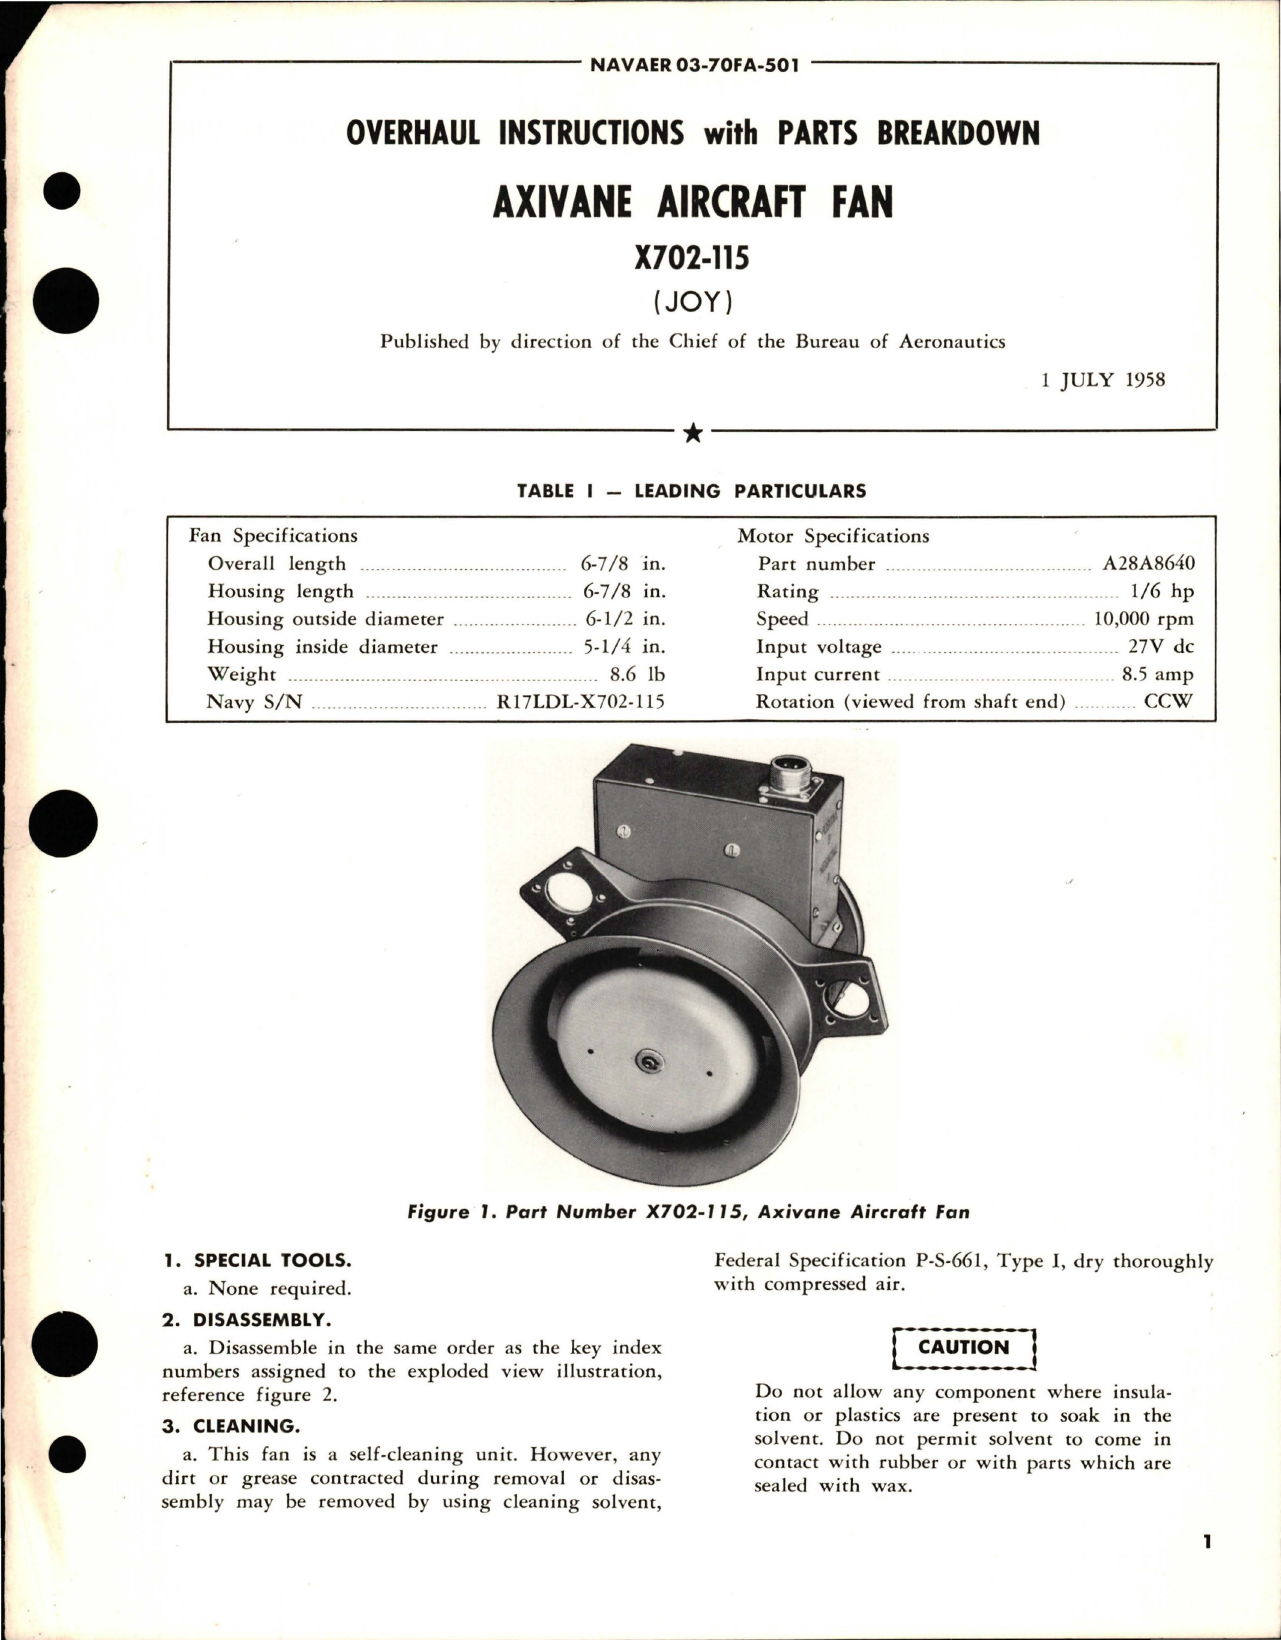 Sample page 1 from AirCorps Library document: Overhaul Instructions with Parts Breakdown for Axivane Aircraft Fan - X702-115 